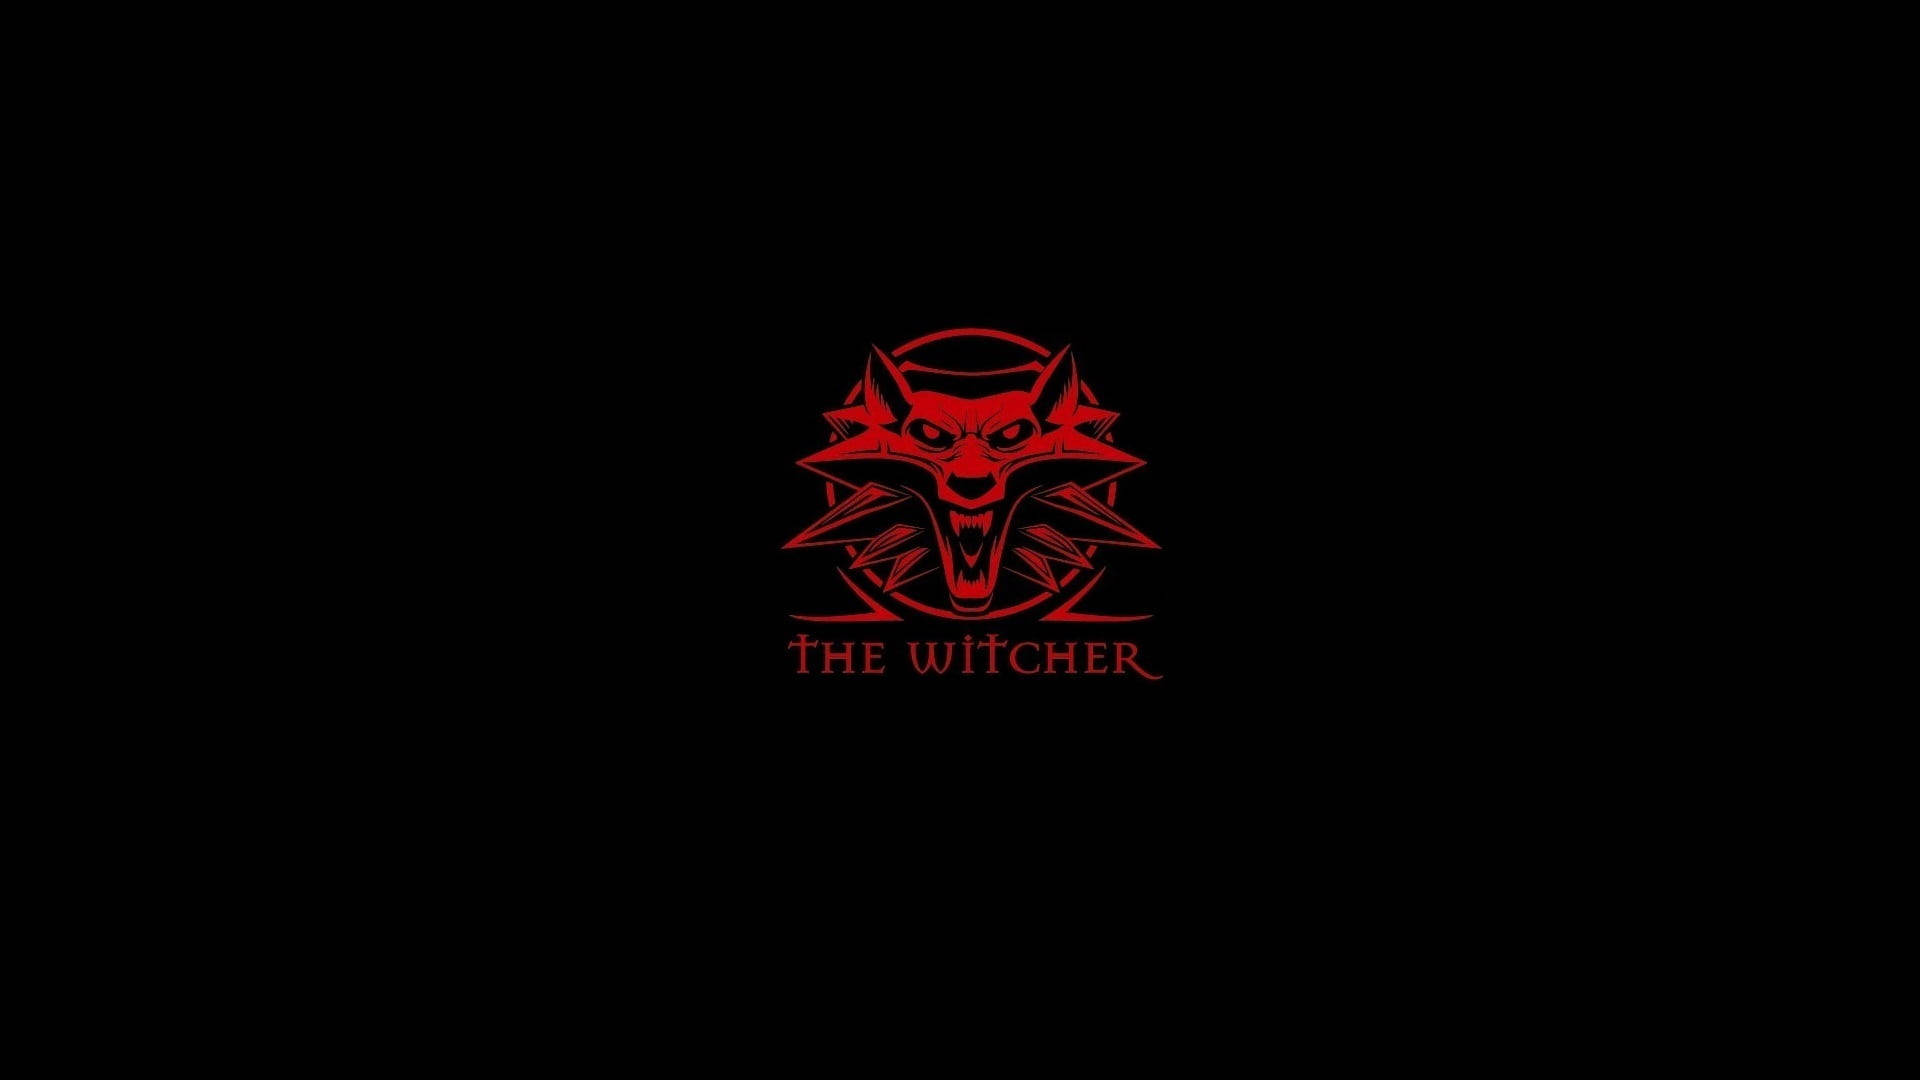 Minimalist Tablet The Witcher Wallpaper